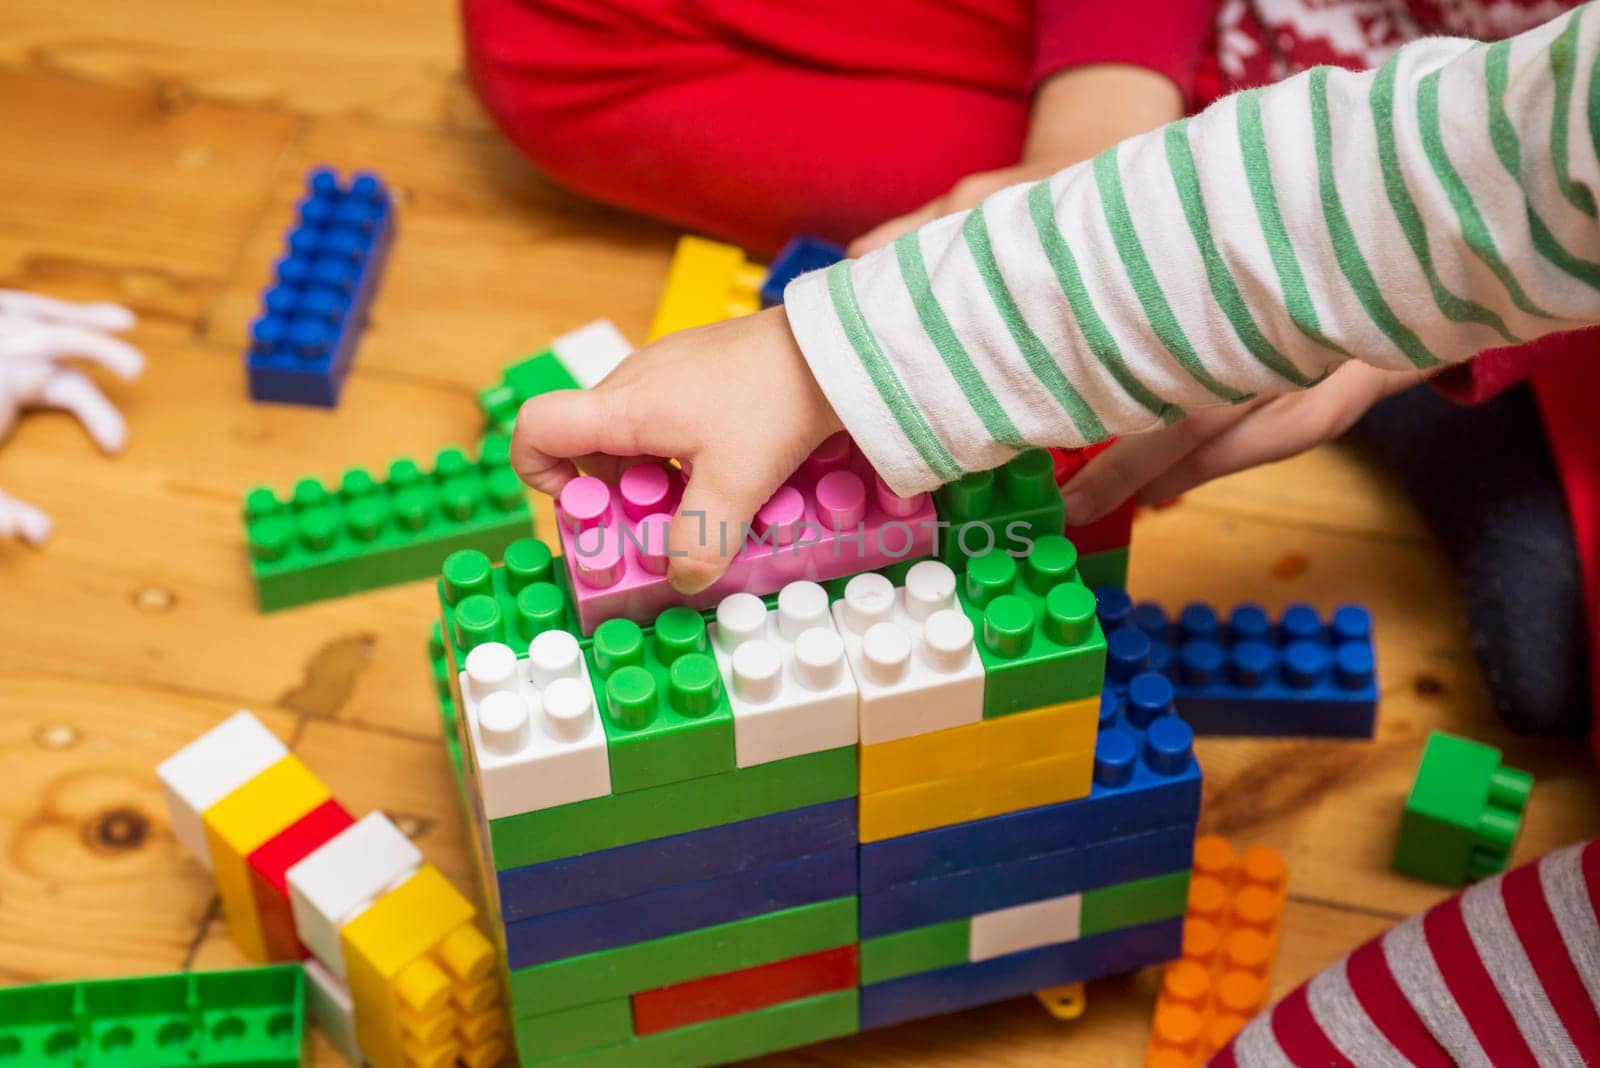 A child isplaying with toy building blocks. A kid is having fun and building out of bright constructor bricks